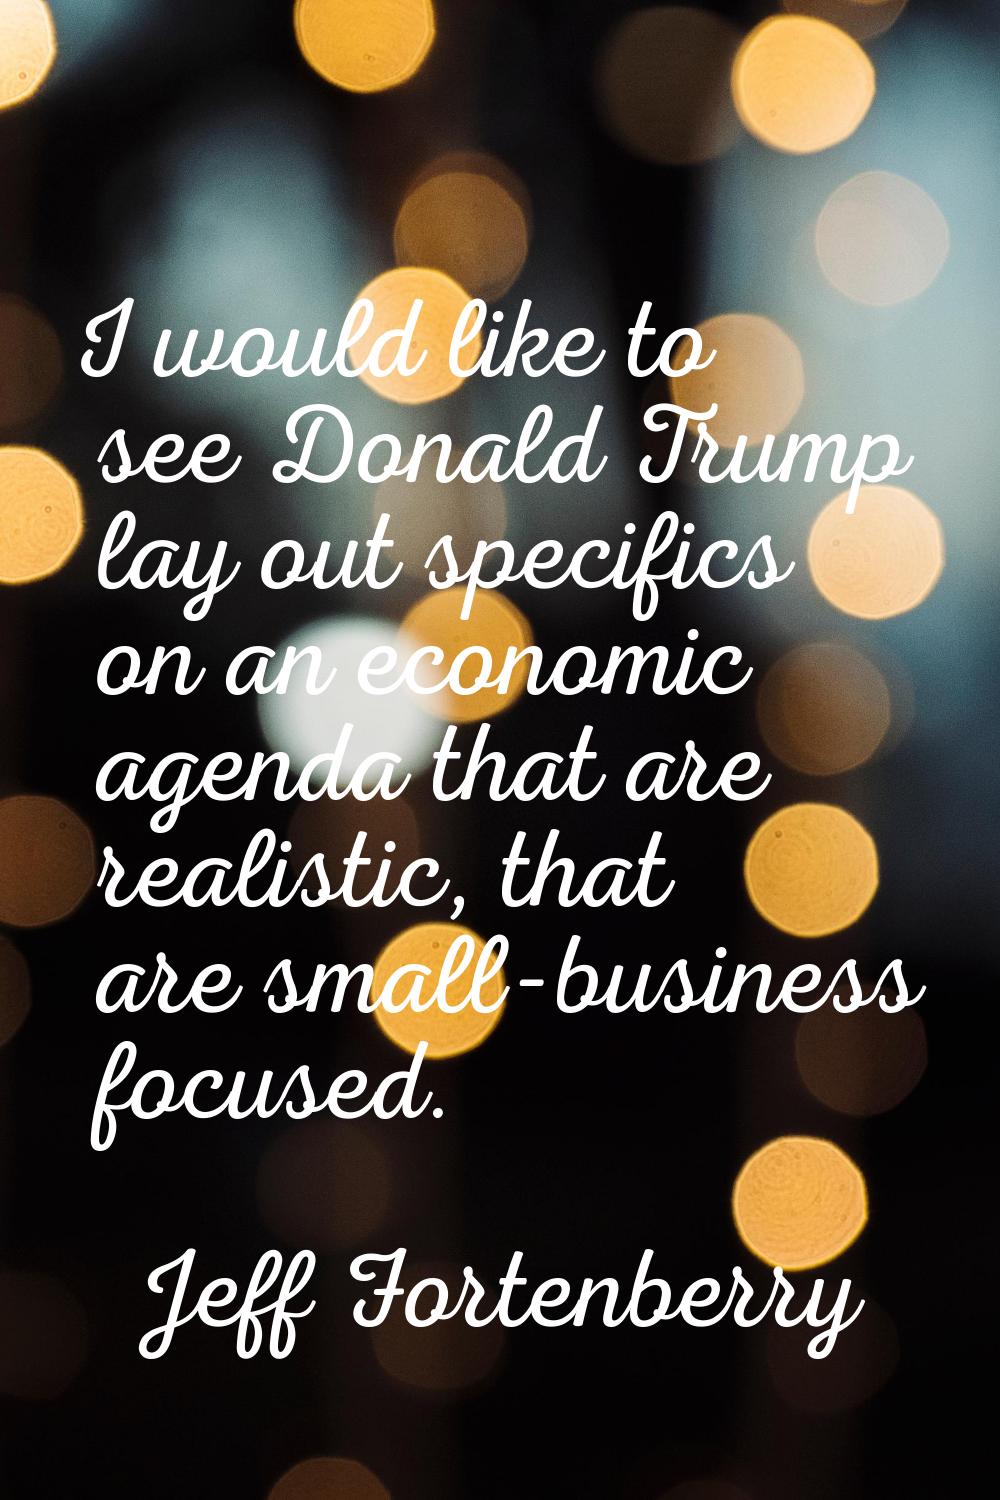 I would like to see Donald Trump lay out specifics on an economic agenda that are realistic, that a